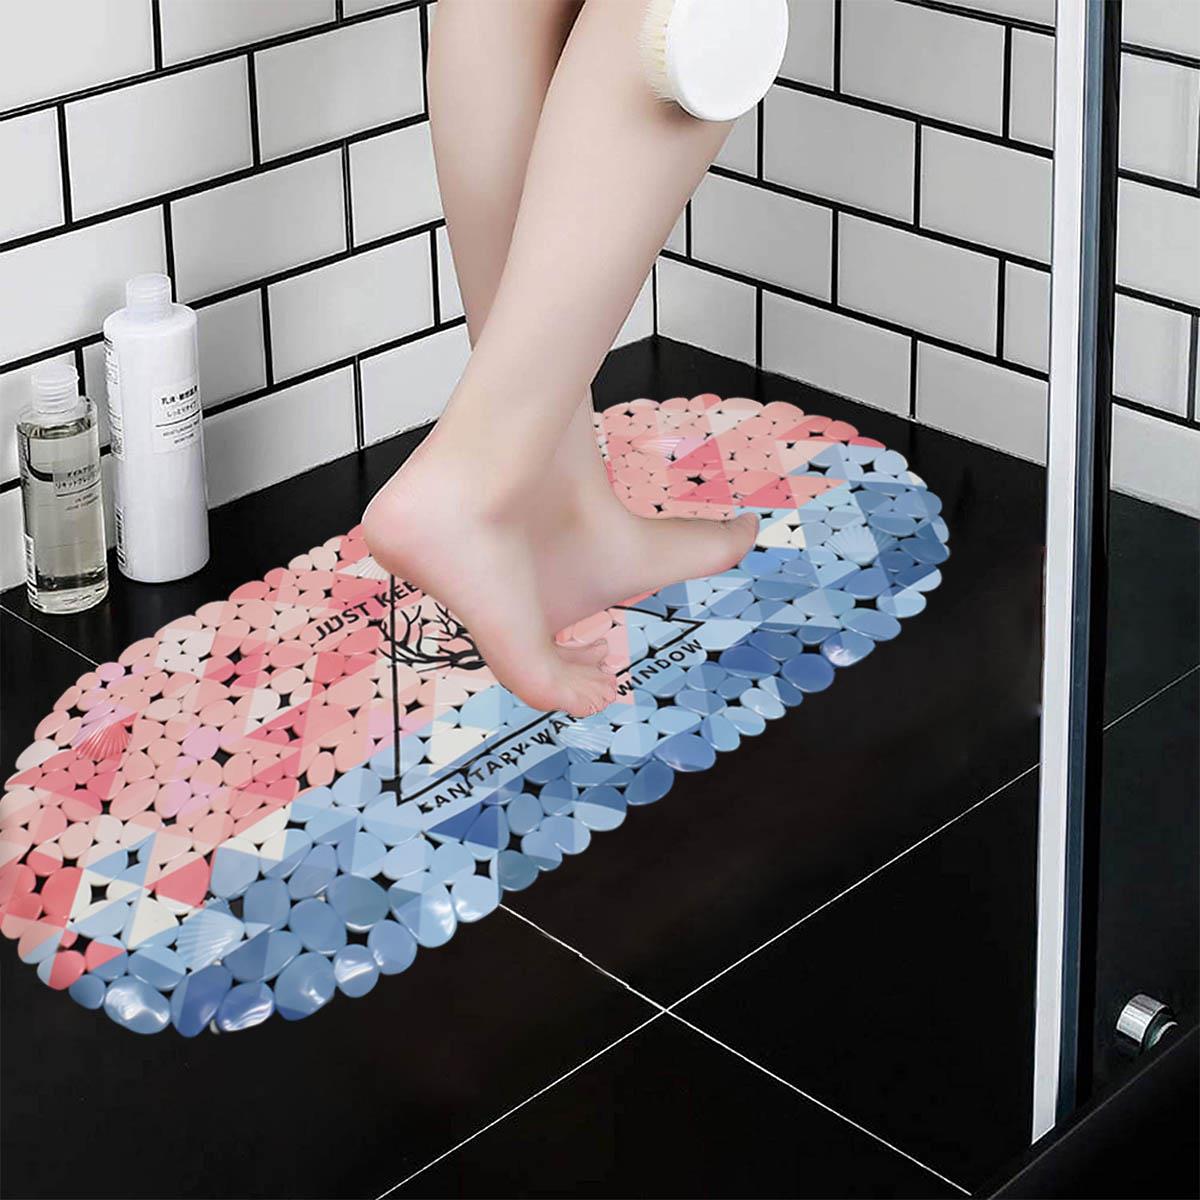 Kookee PVC Bath Mat Non-Slip Pebble Bathtub Mat L=69cm x W=35cm (for Smooth/Non-Textured Tubs Only) Safe Shower Mat with Drain Holes, Suction Cups for Bathroom (87-4935)